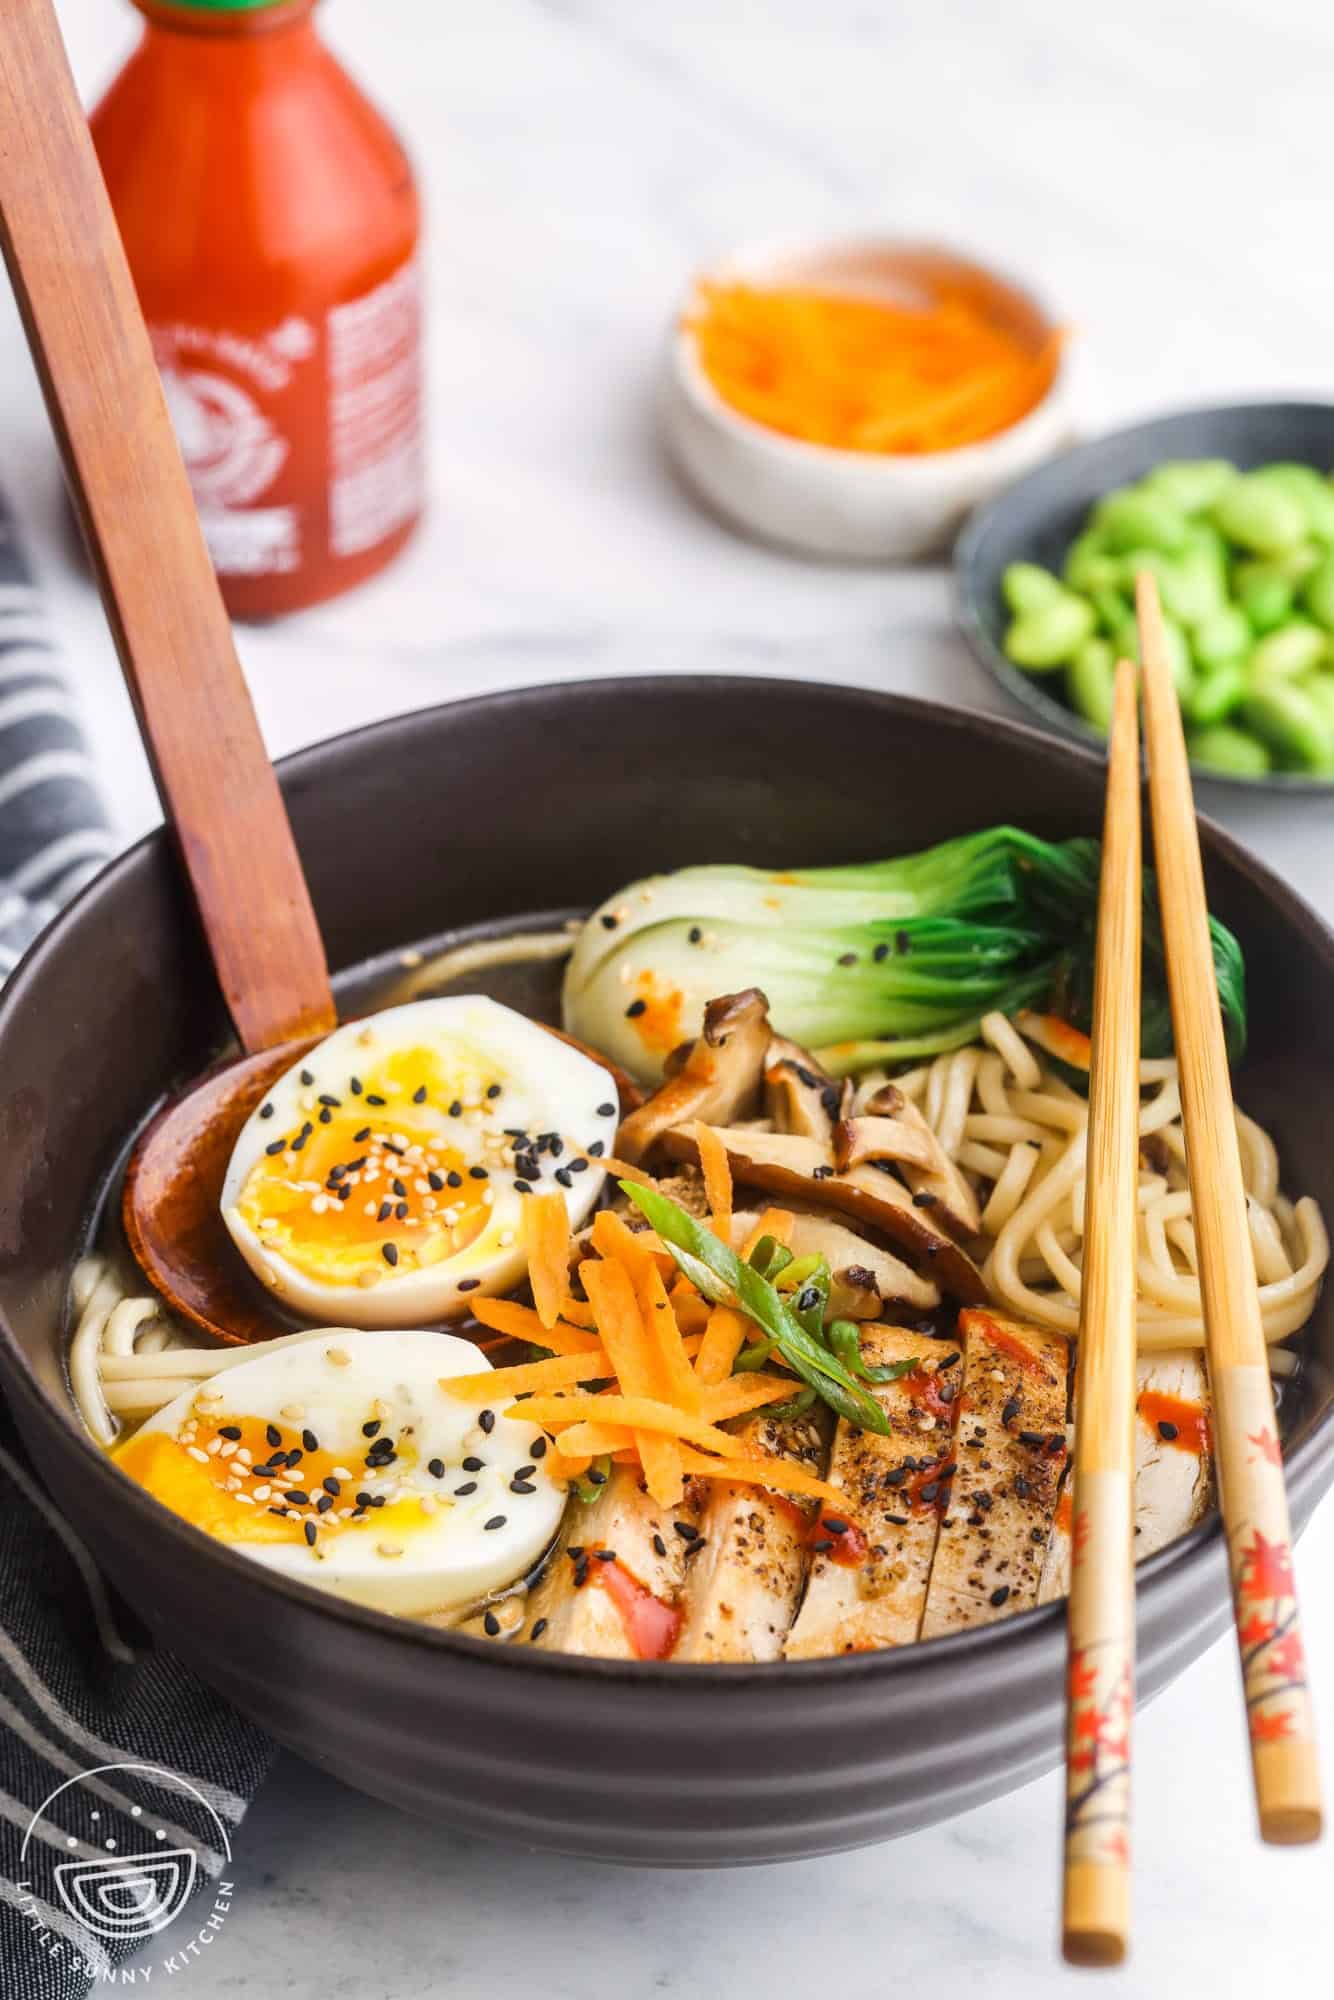 a black bowl of ramen with chicken, eggs, and veggies. A set of chopsticks is on the bowl.